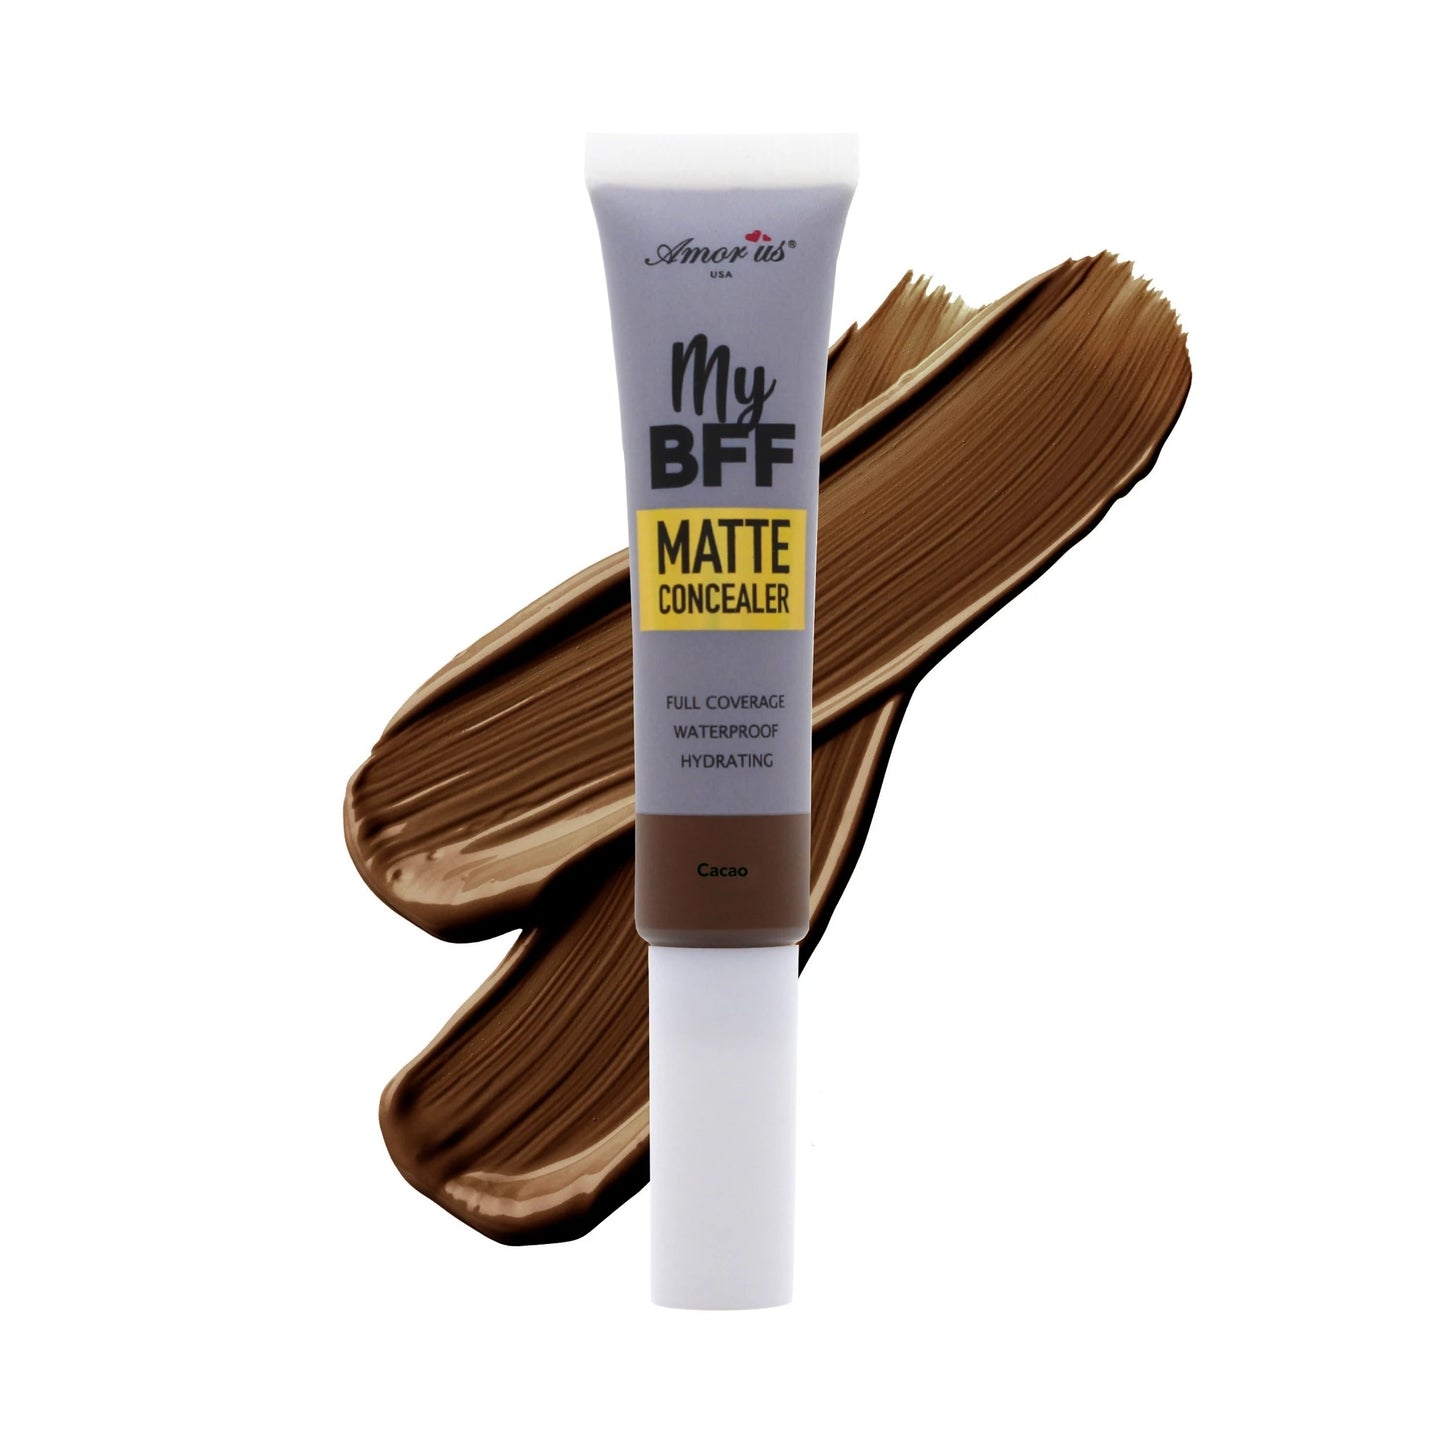 My BFF Matte Concealer - 6 cover tones by Amor Us